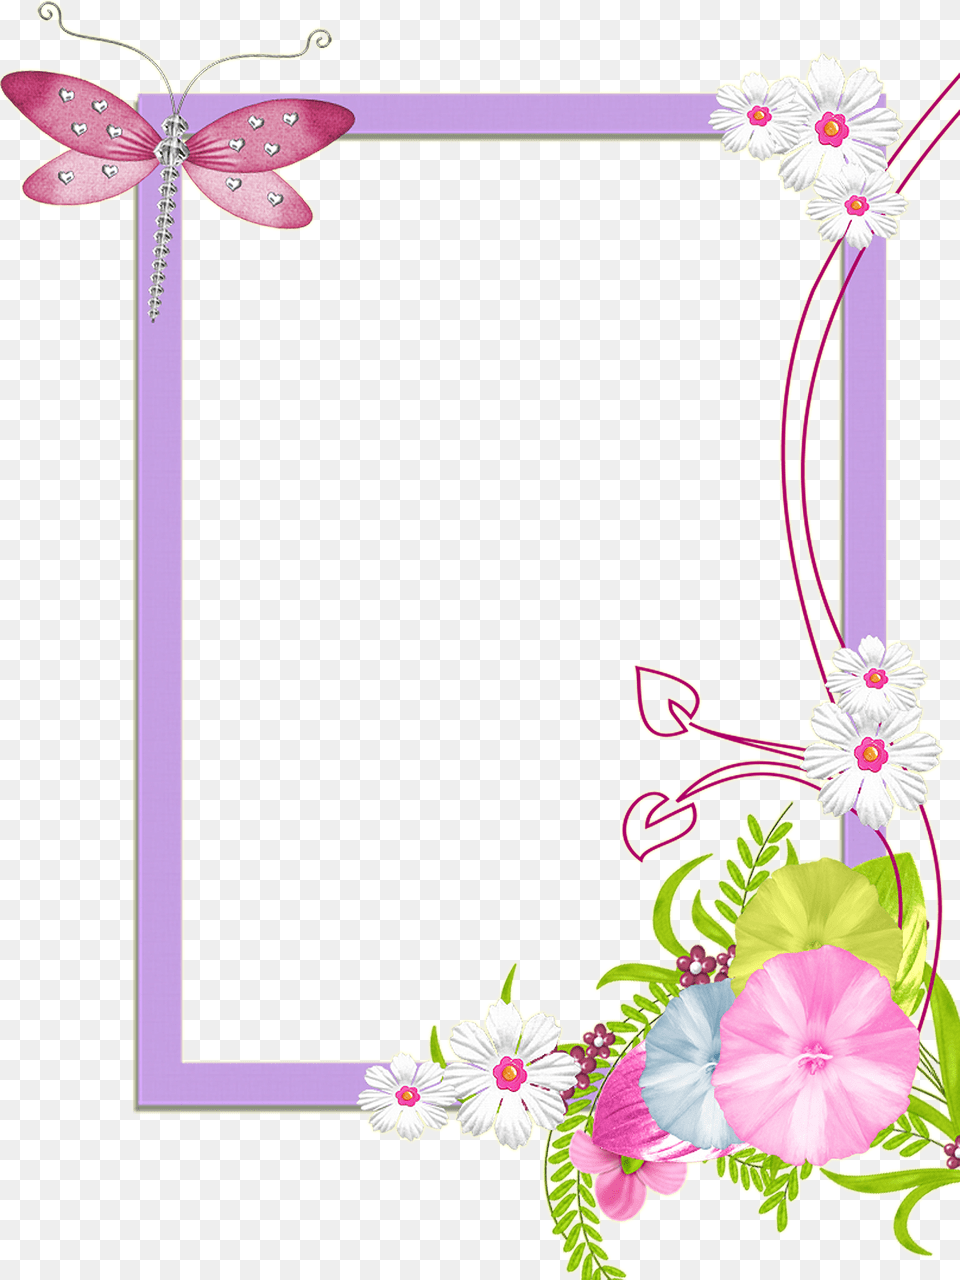 Frame Design Pin By Cantik Manis On And Frame Cute Cute Flower Frame, Envelope, Greeting Card, Mail, Art Png Image